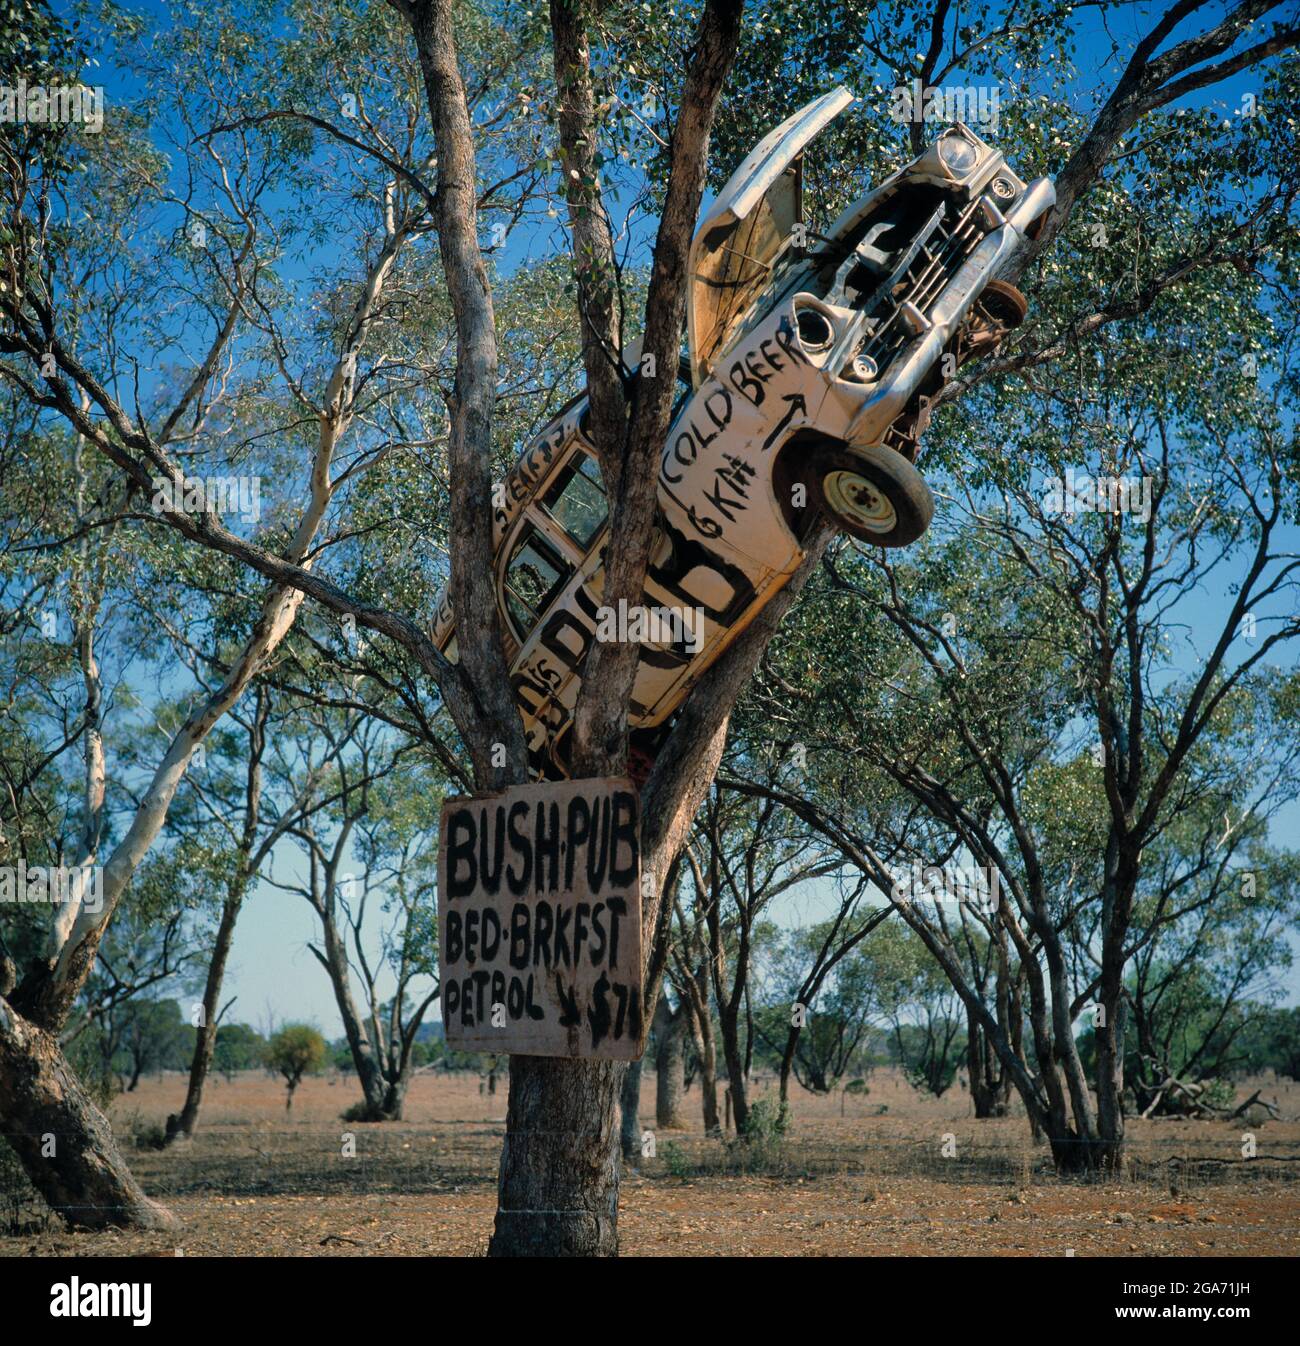 Australia. Northern Territory outback. Bush Pub sign. Wrecked car stuck up a gum tree. Stock Photo